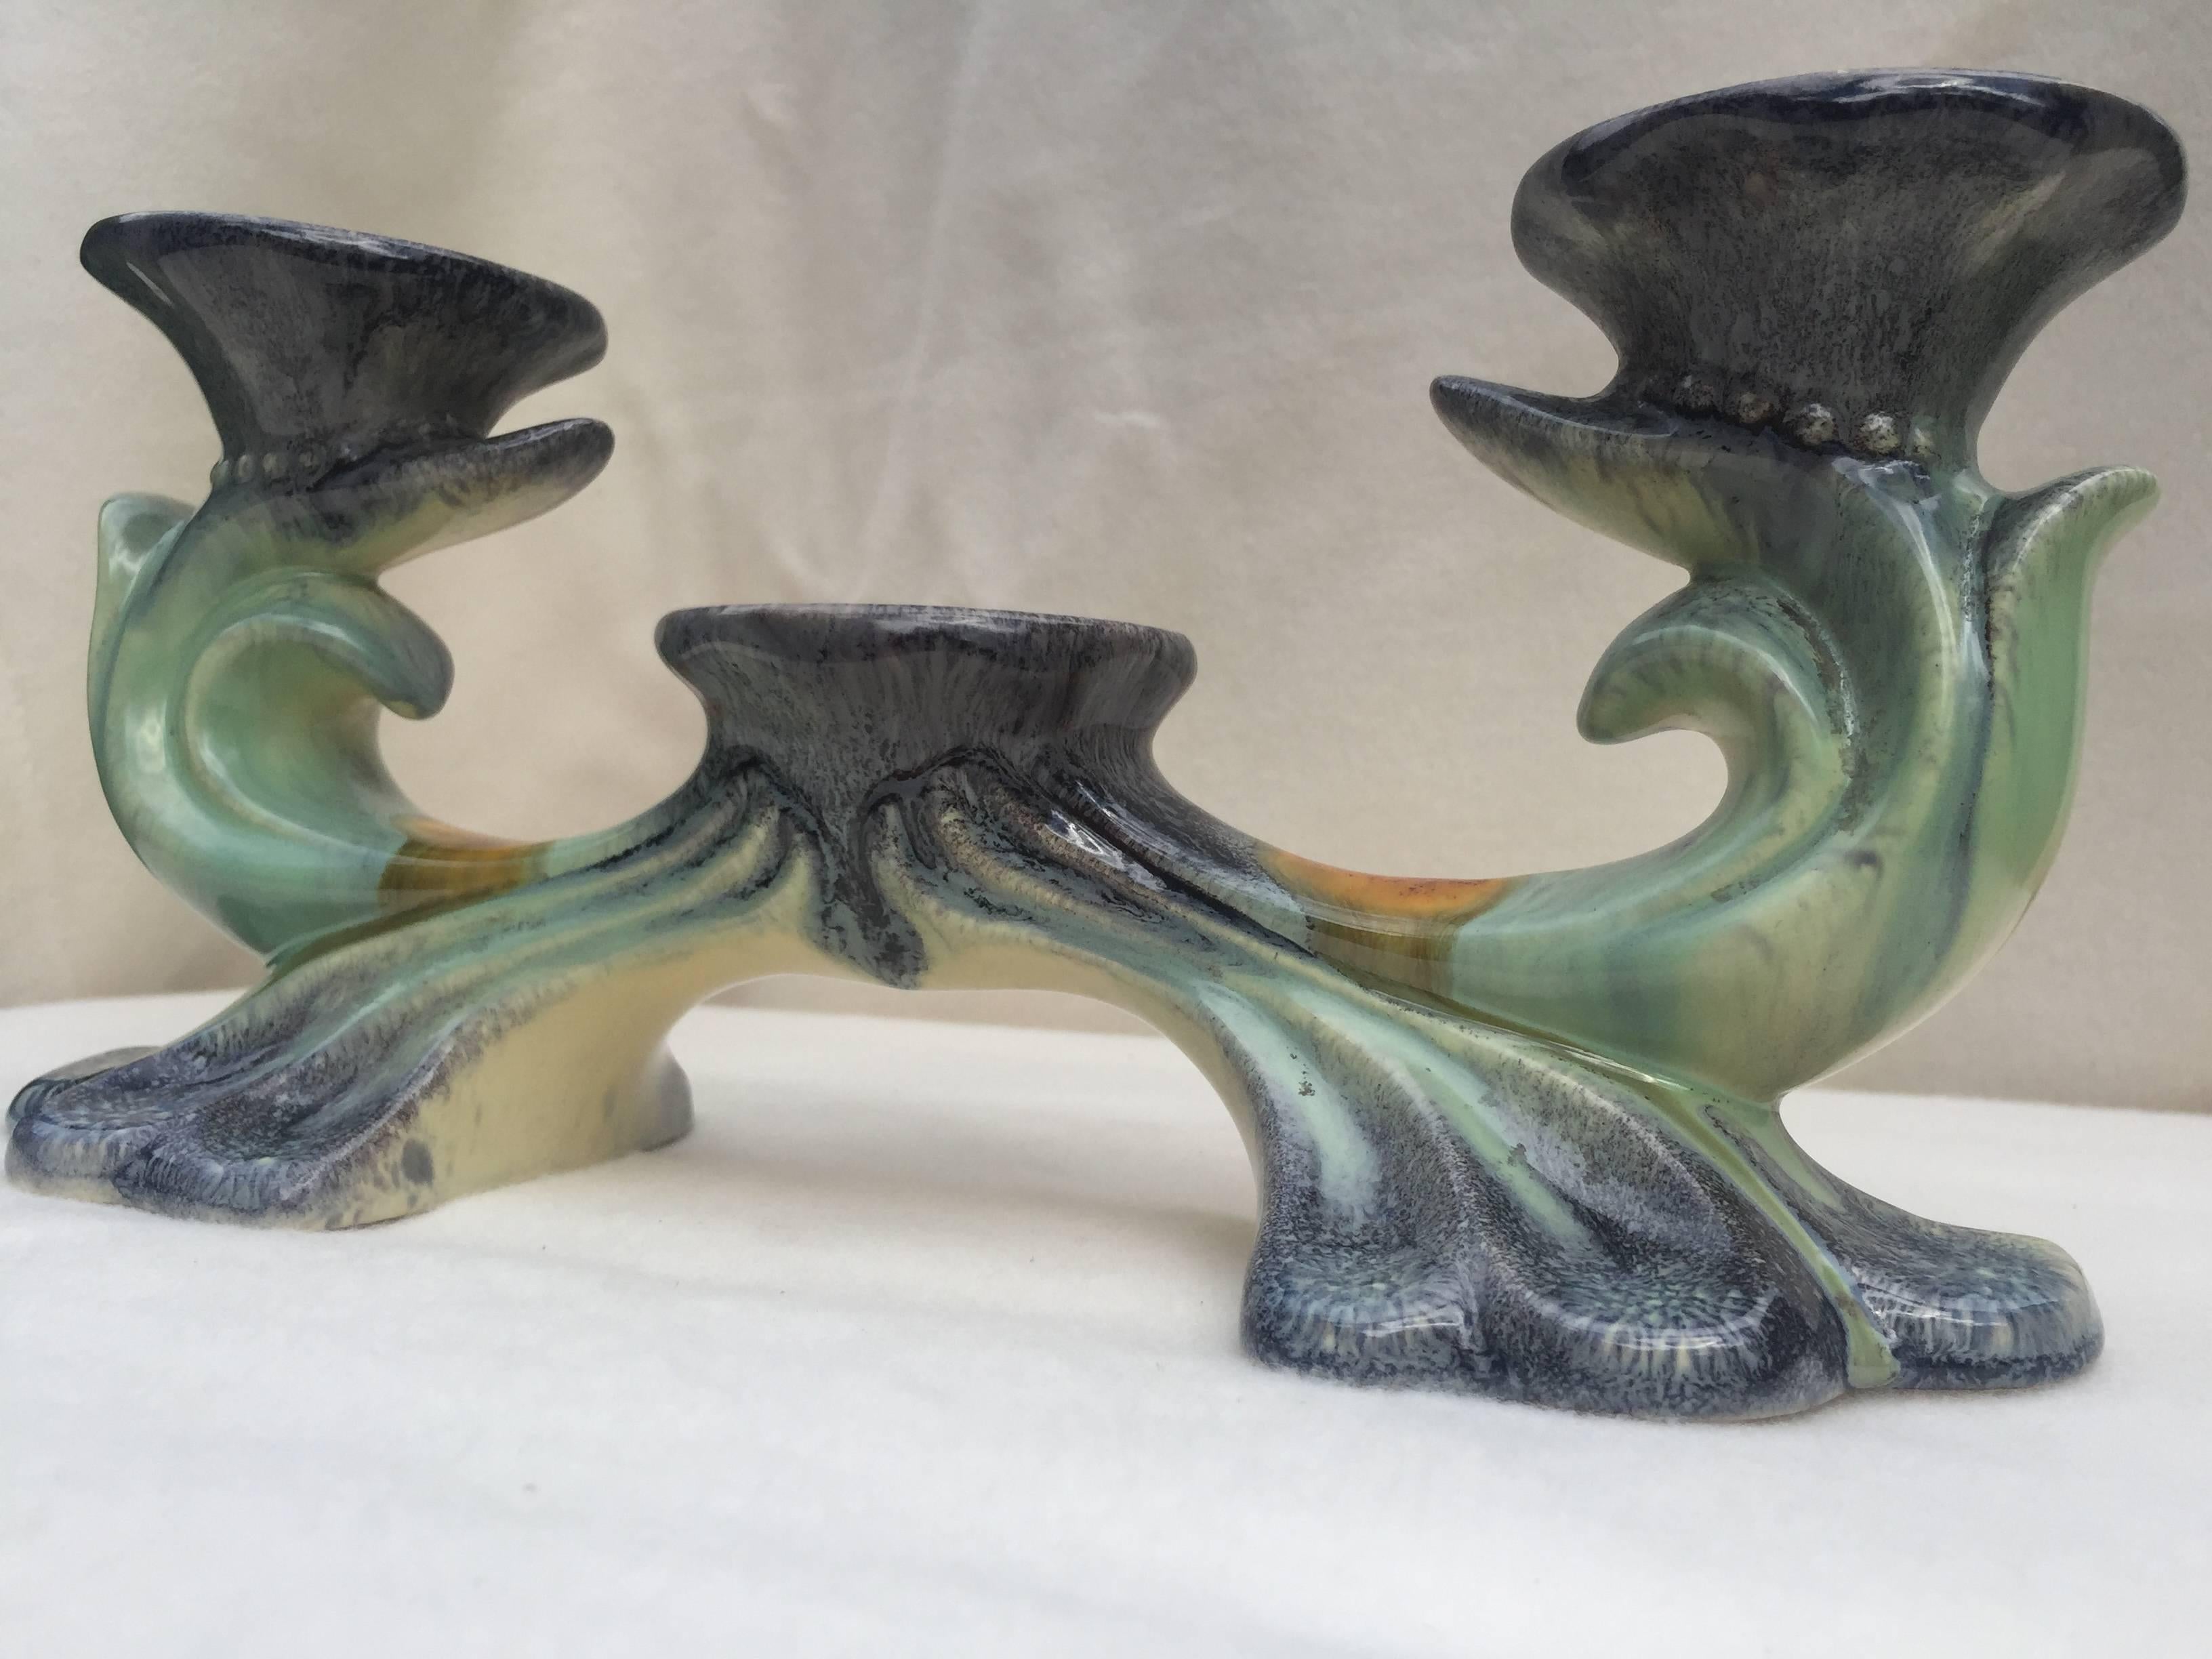 Glazed candleholder, circa 1930 in a free plant form shape with glossy glaze in green, blue and orange, marked underneath, Germany 596.
The inner diameter of the holes are 4.5'' for normal candles.